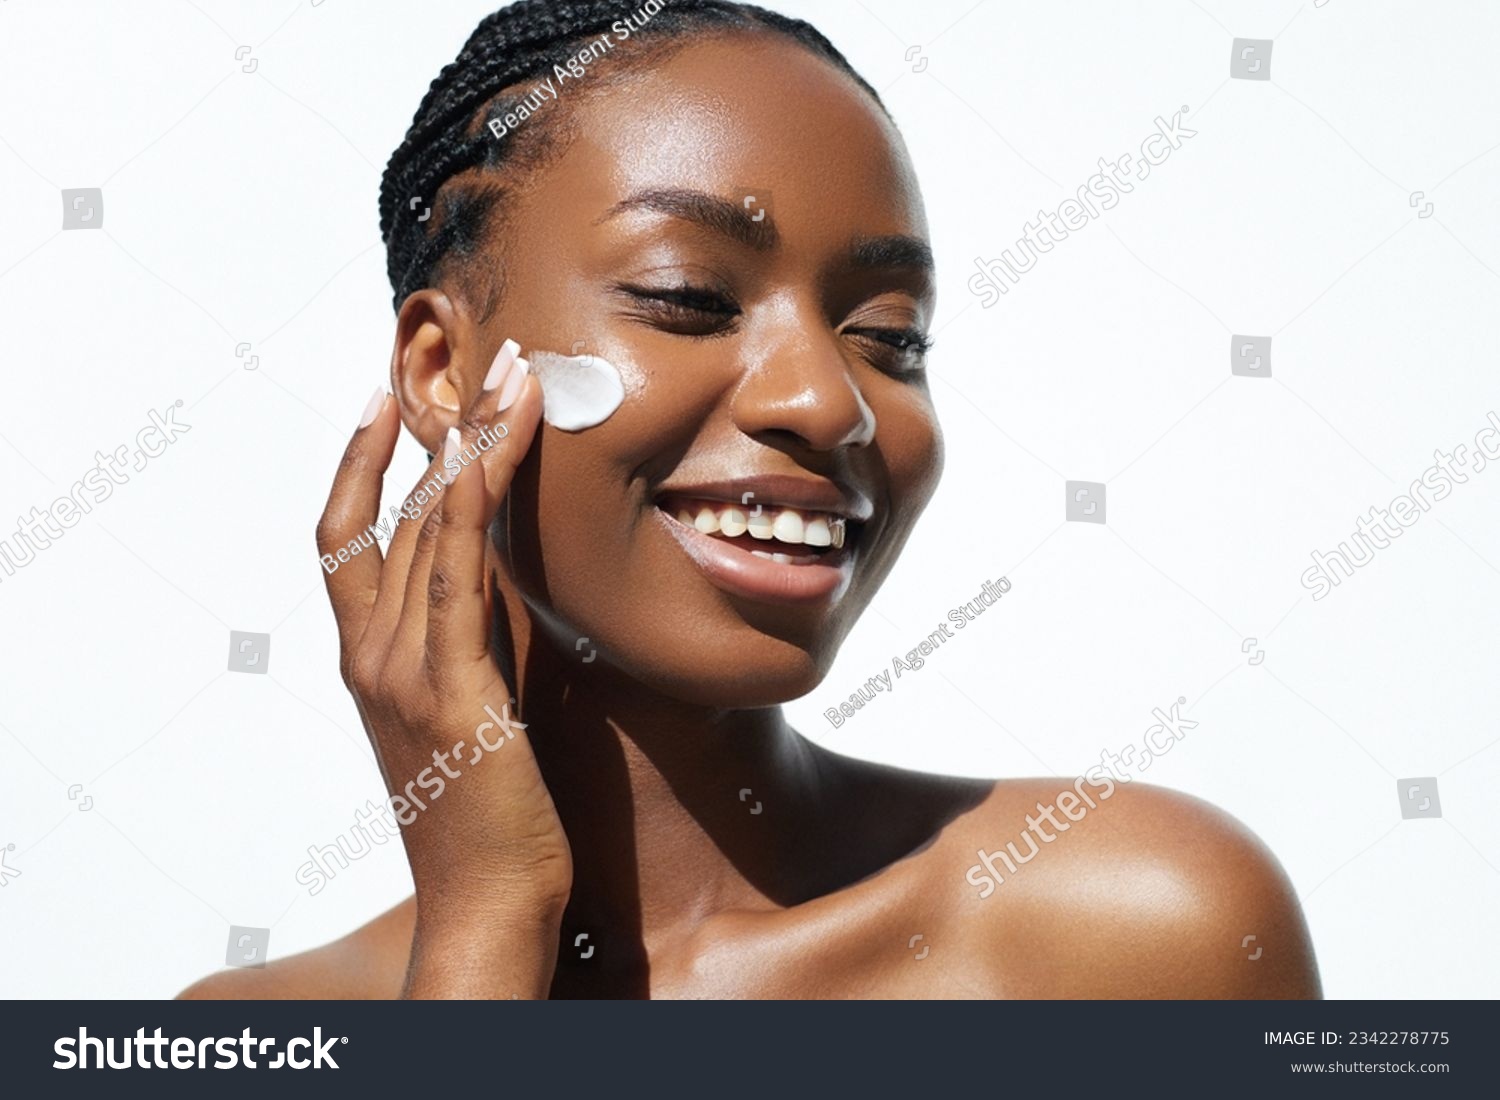 Beauty and skin care. Skincare hydration and oil balance. Portrait of African American woman with afro braids hairstyle is applying a cream smear on her face and standing against white background #2342278775